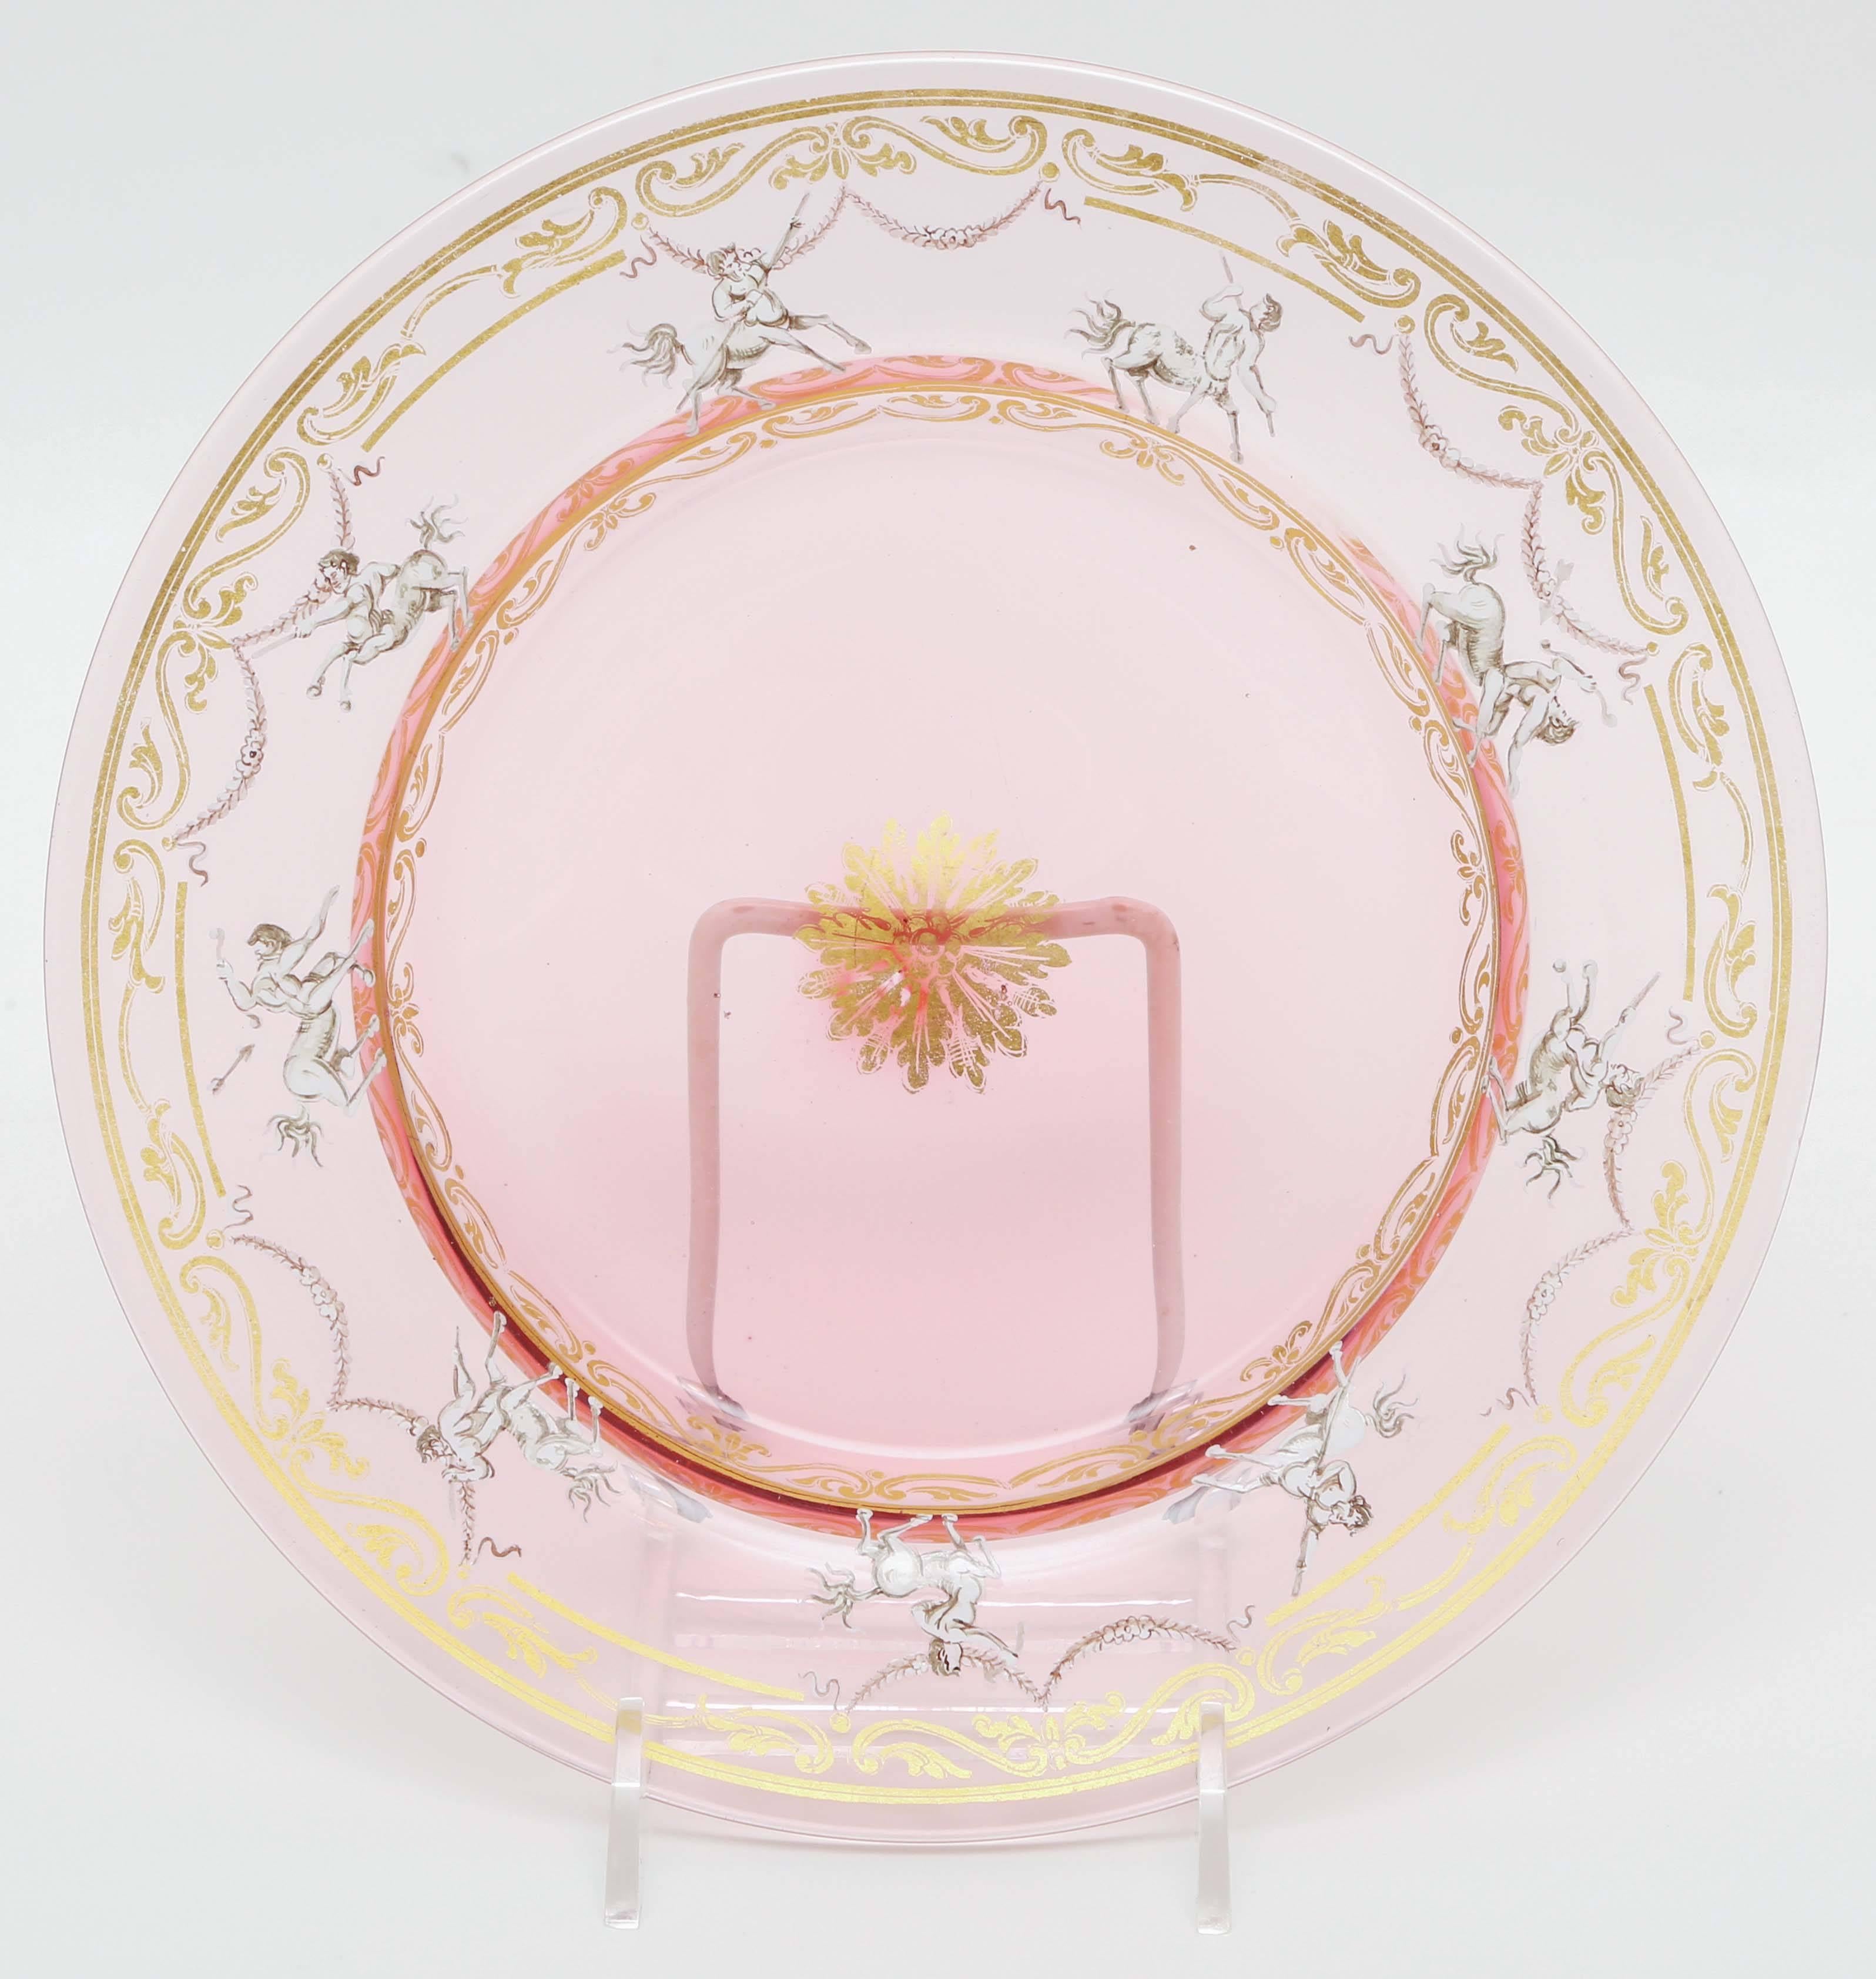 A charming set of Venetian glass plates in a nice soft shade of pink. Accented with hand painting and 24-karat gold blown inclusion. A great size for salad or dessert and would be stunning in a cabinet display. Please see our matching wine and water